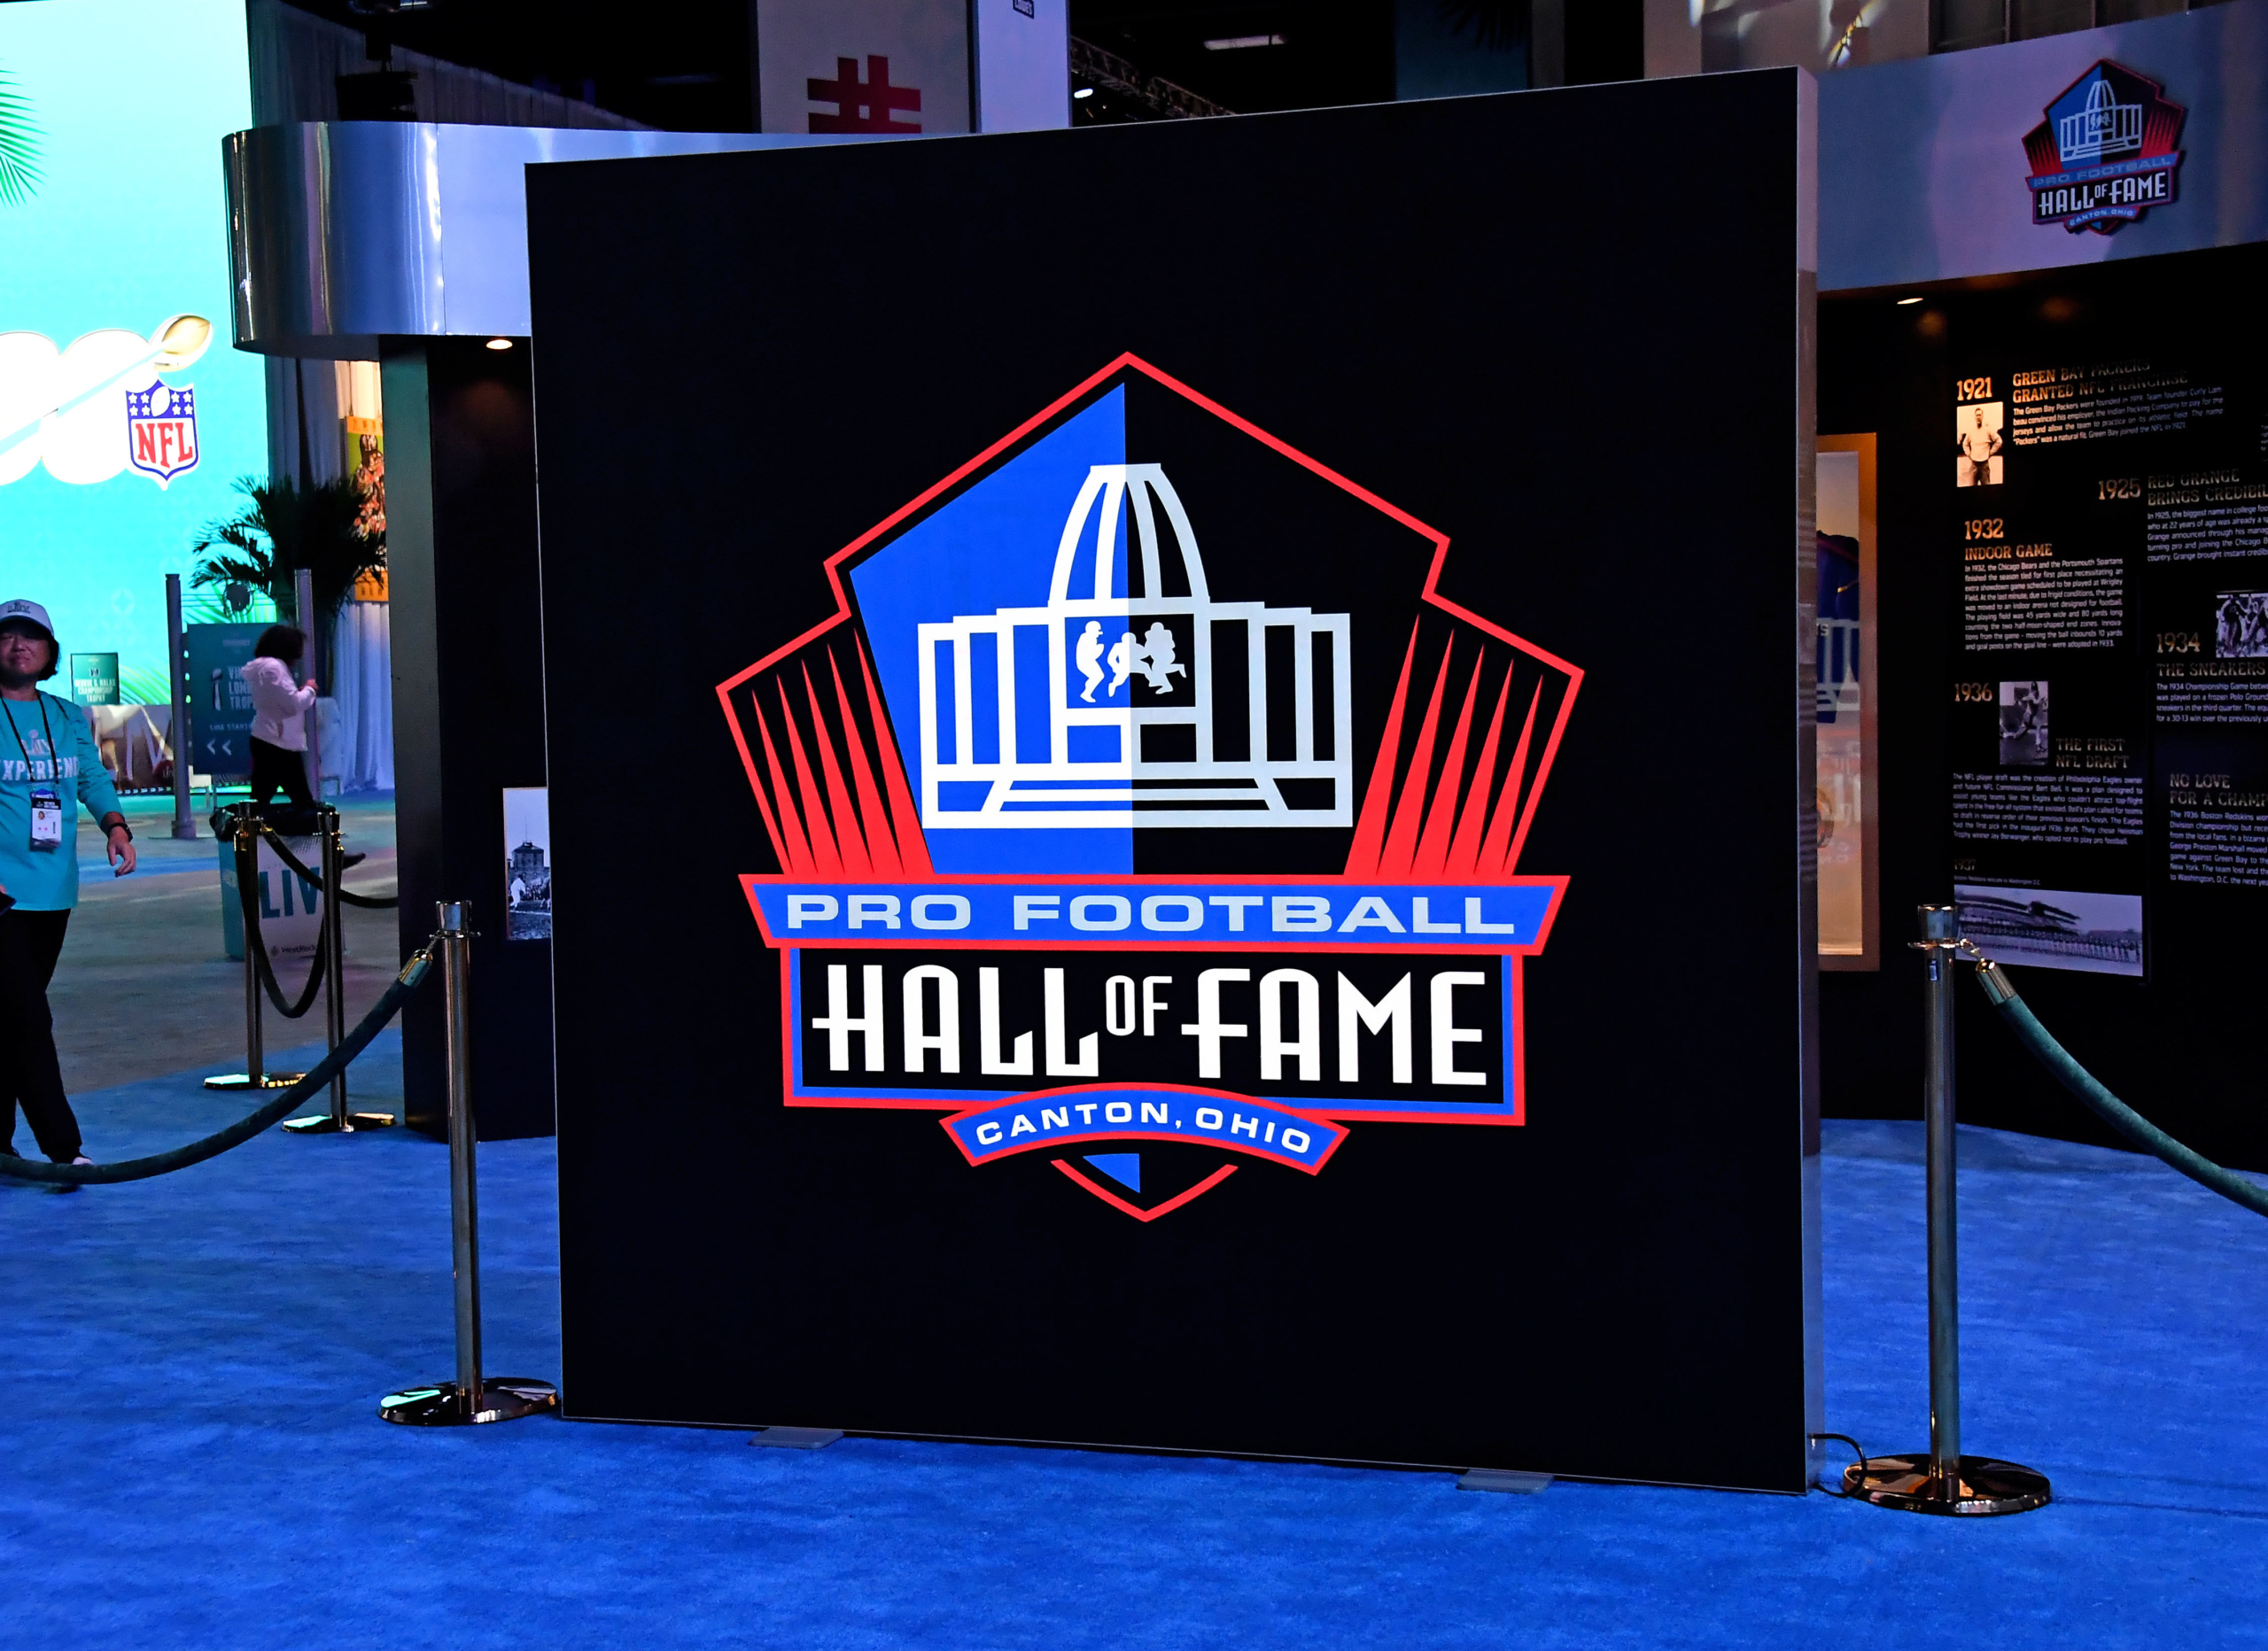 Former Disney Exec to Develop Resort at Pro Football Hall of Fame